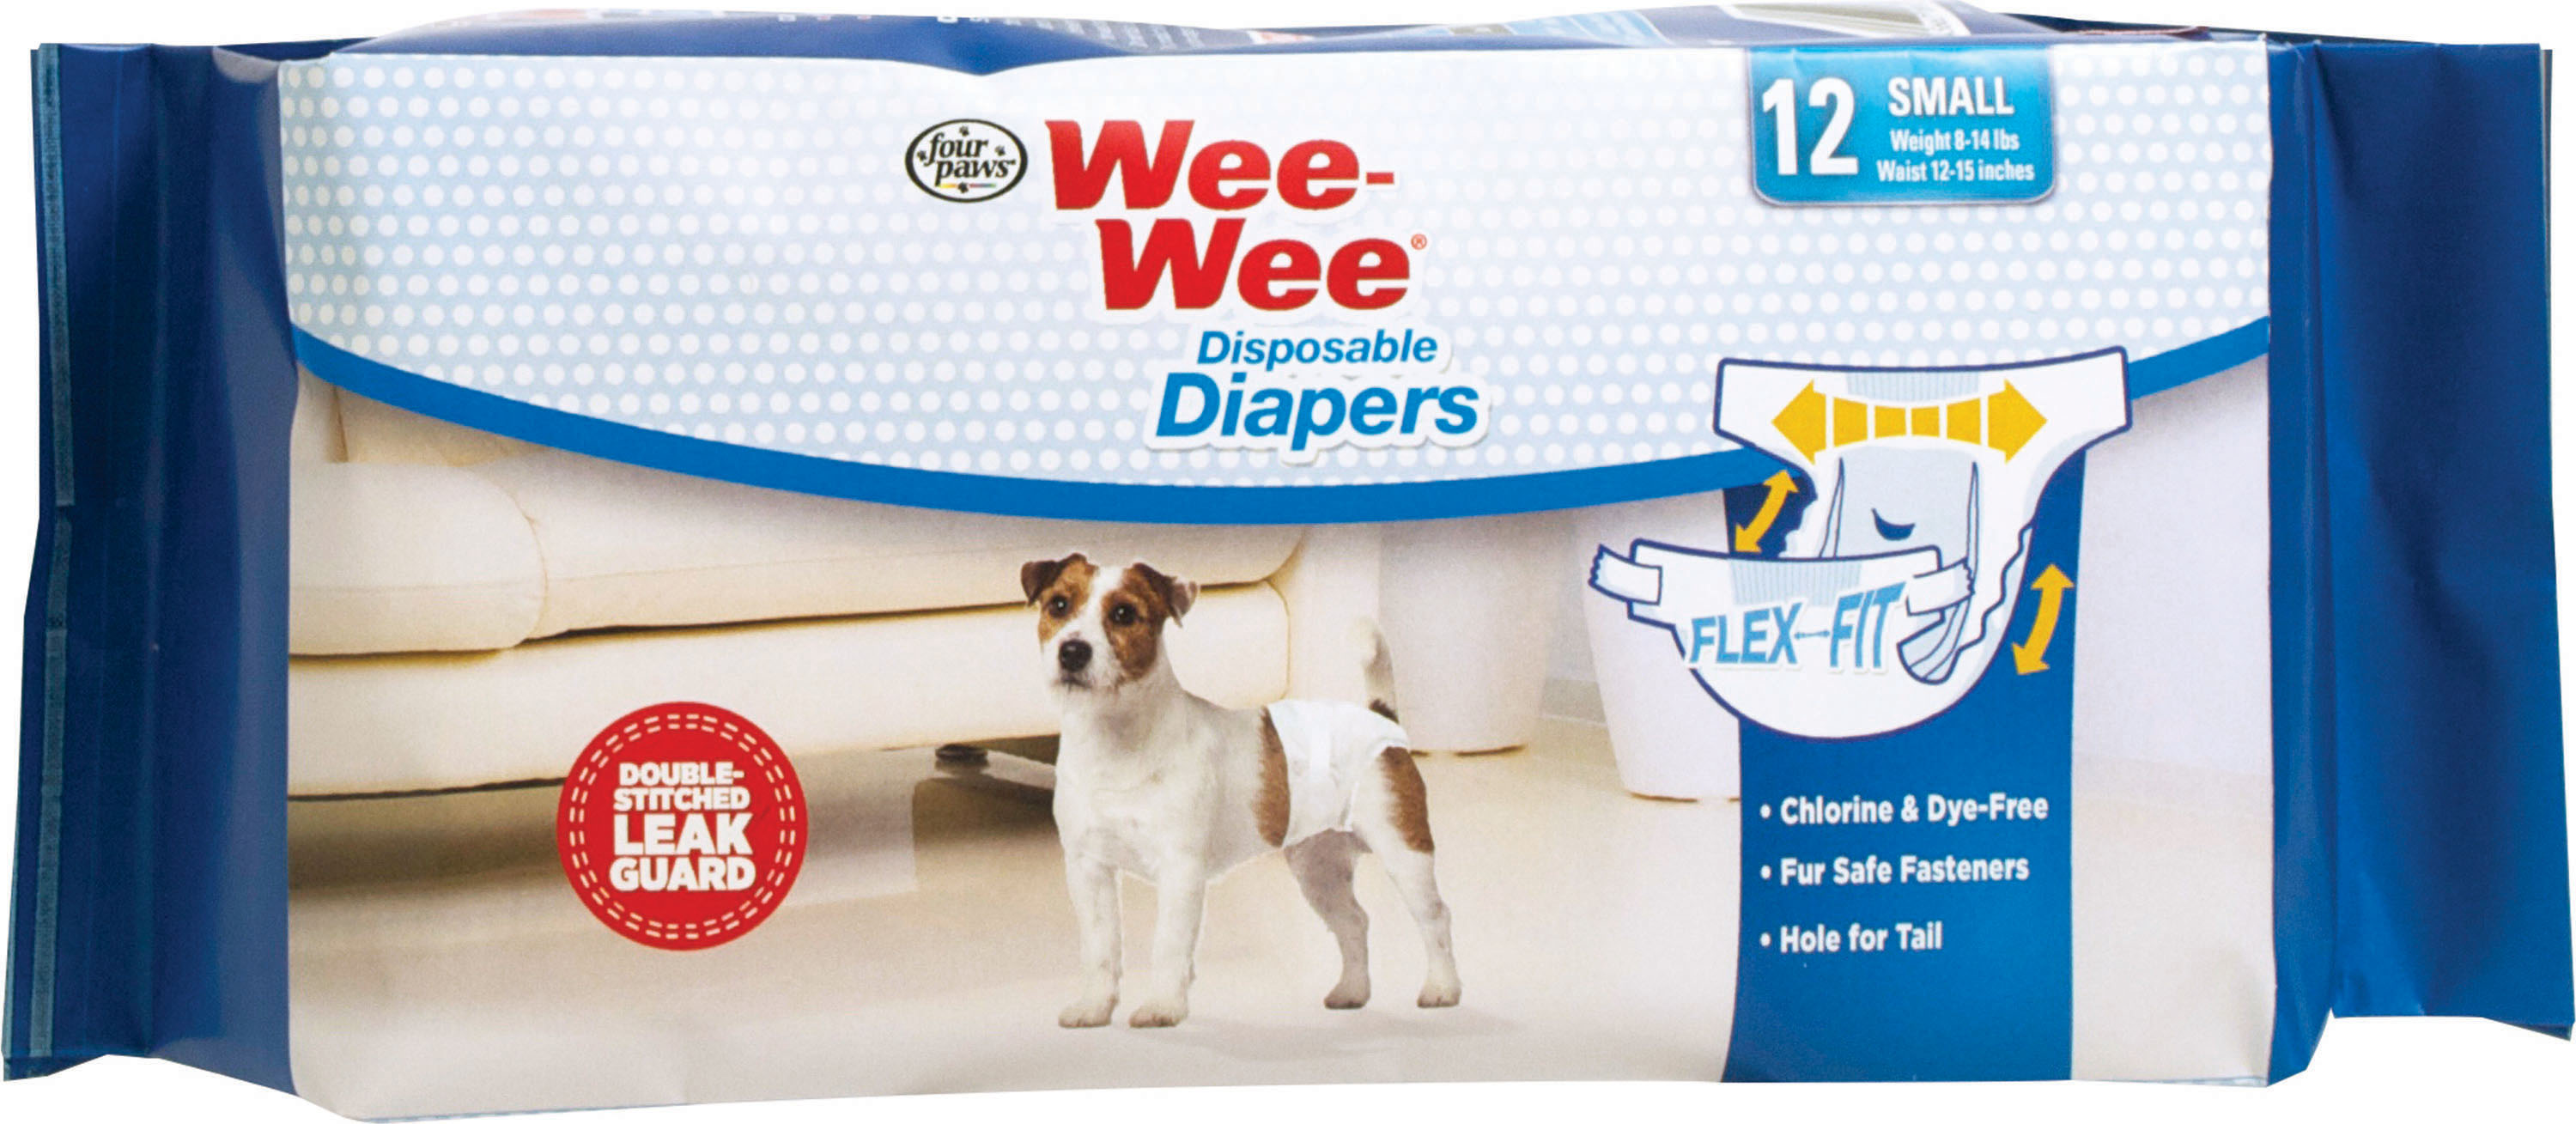 Wee-wee Disposable Diapers (Option 1: Small)